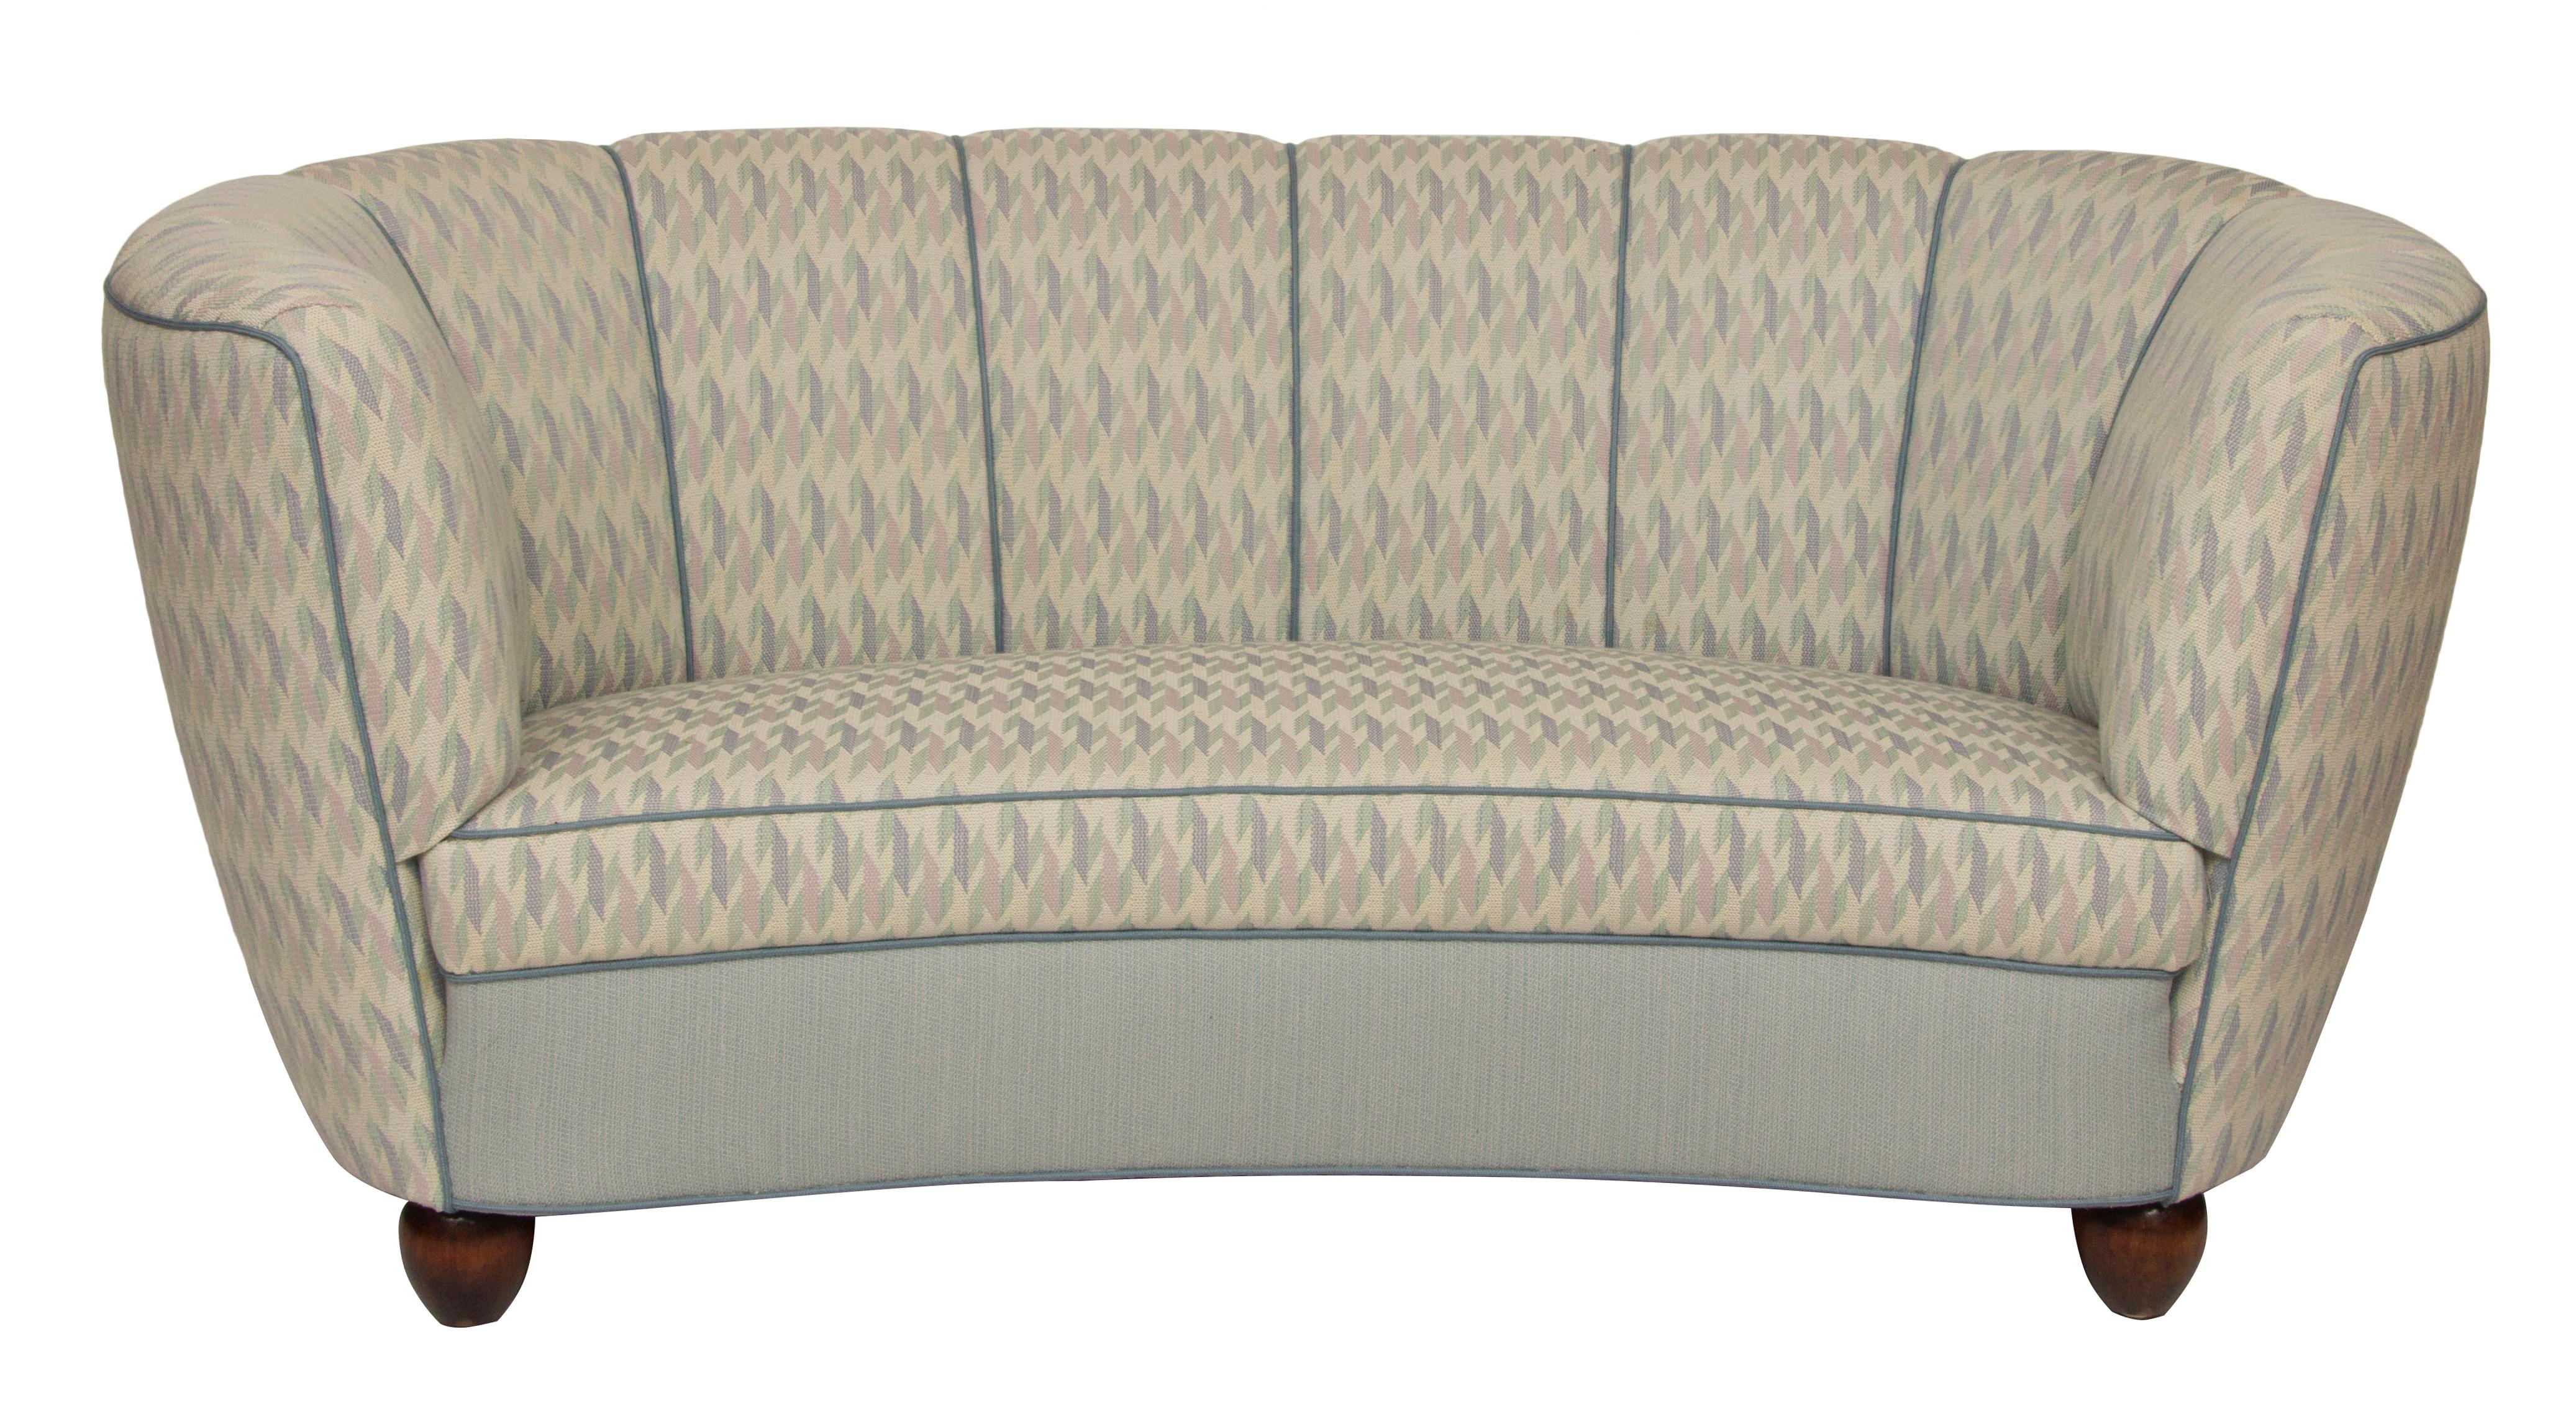 Midcentury banana sofa by Slagelse Mobelvaerk.
This is an early 1940s sofa by Slagelse Mobelvaerk, made in the manner of Modernist Danish architect, Flemming Lassen. The defined lines that characterize Danish design curve inward in this sofa,